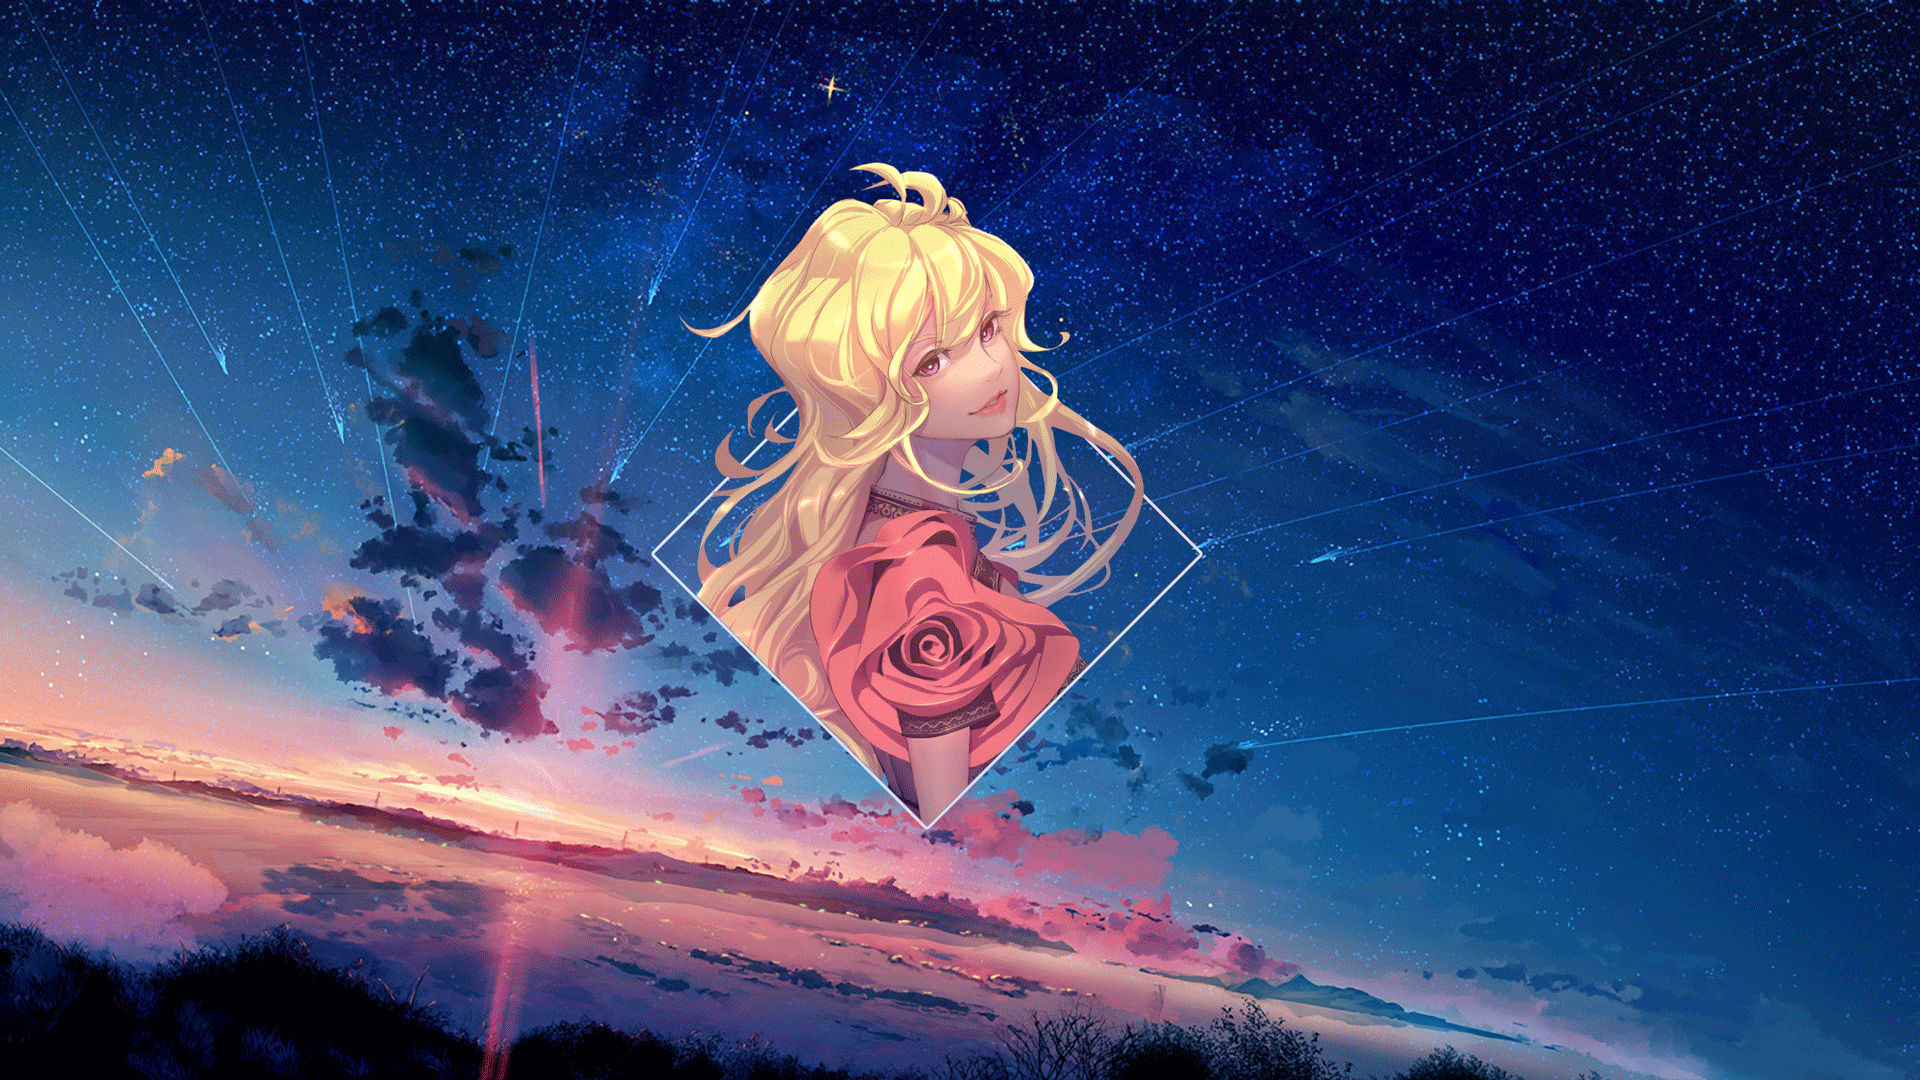 Anime Anime Girls Rose Stars Anime Landscape Photoshop Digital Art Picture In Picture Piture In Pict 1920x1080